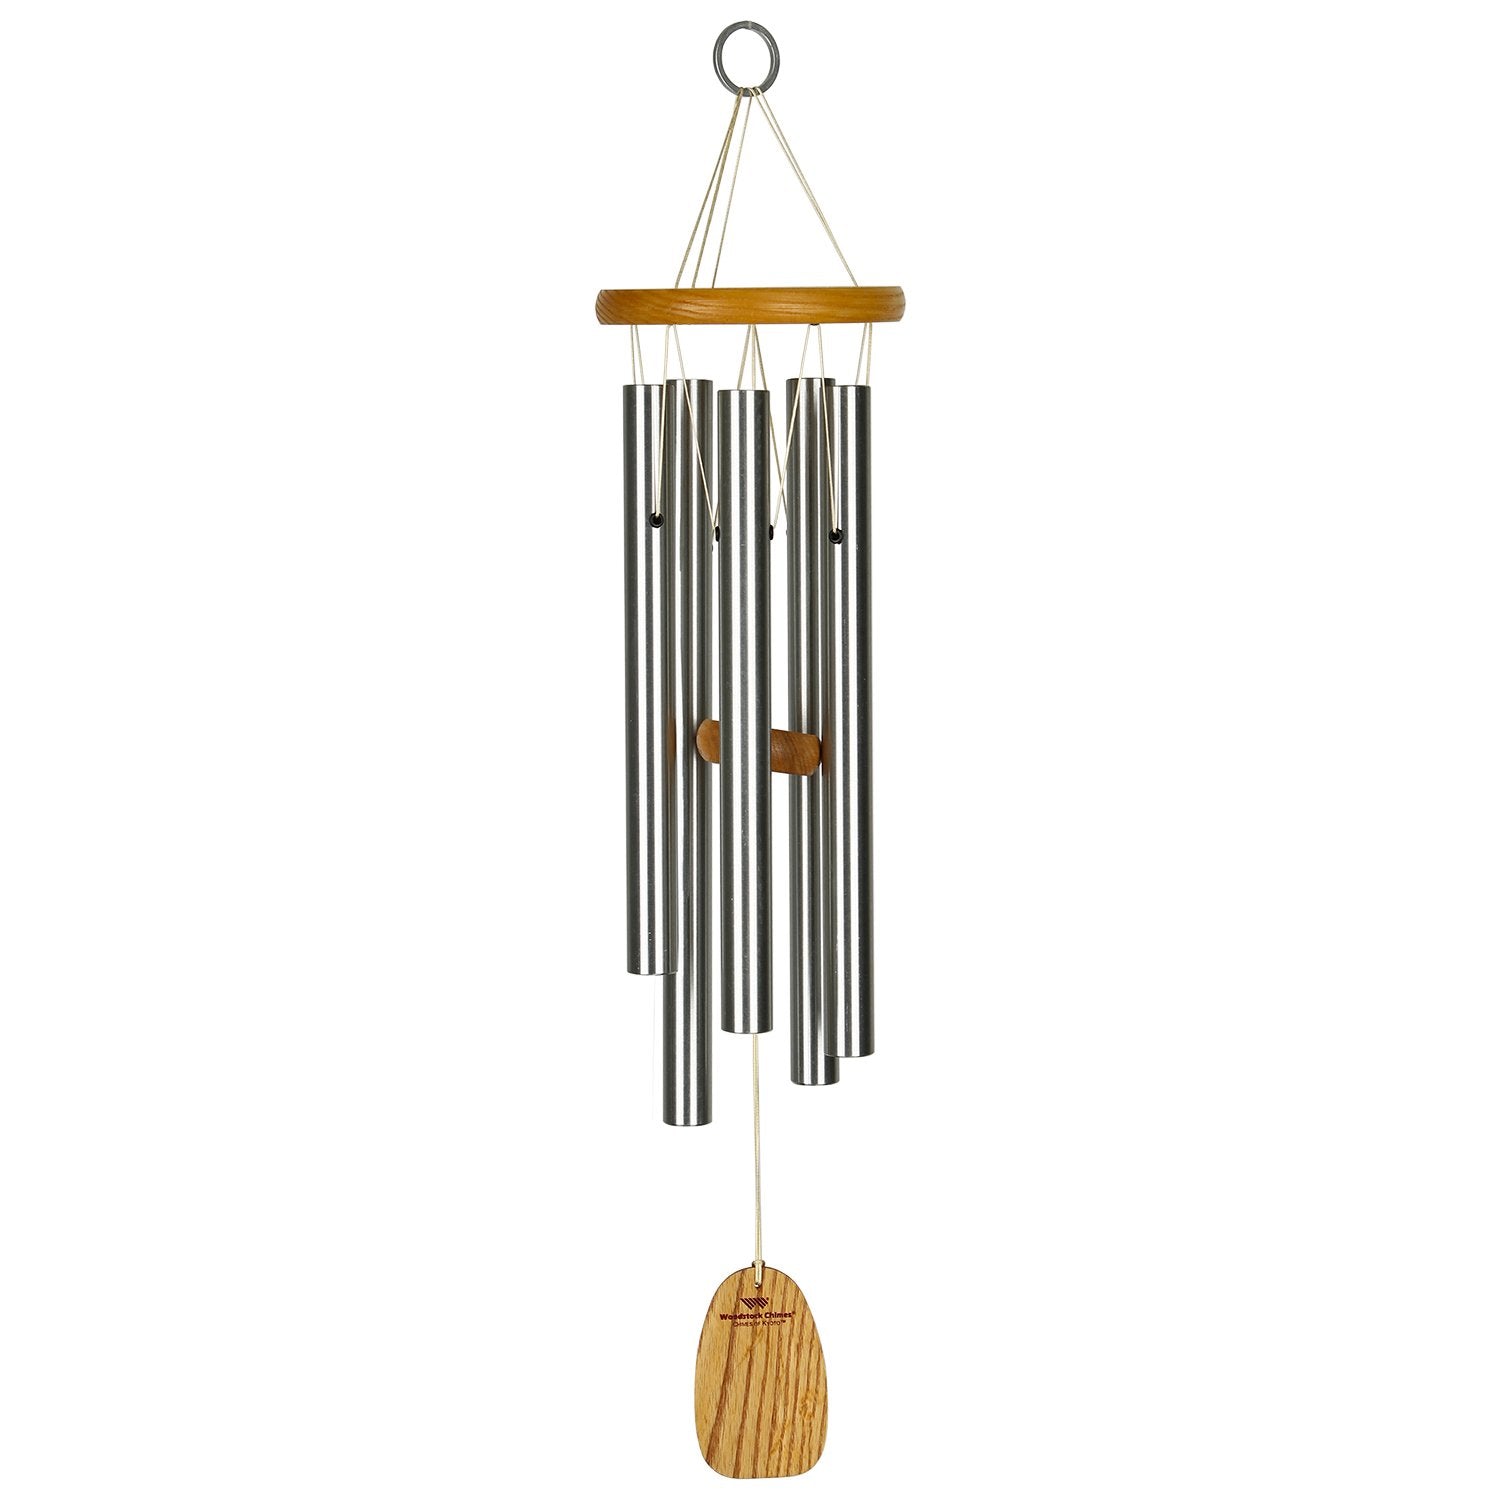 Chimes of Kyoto full product image